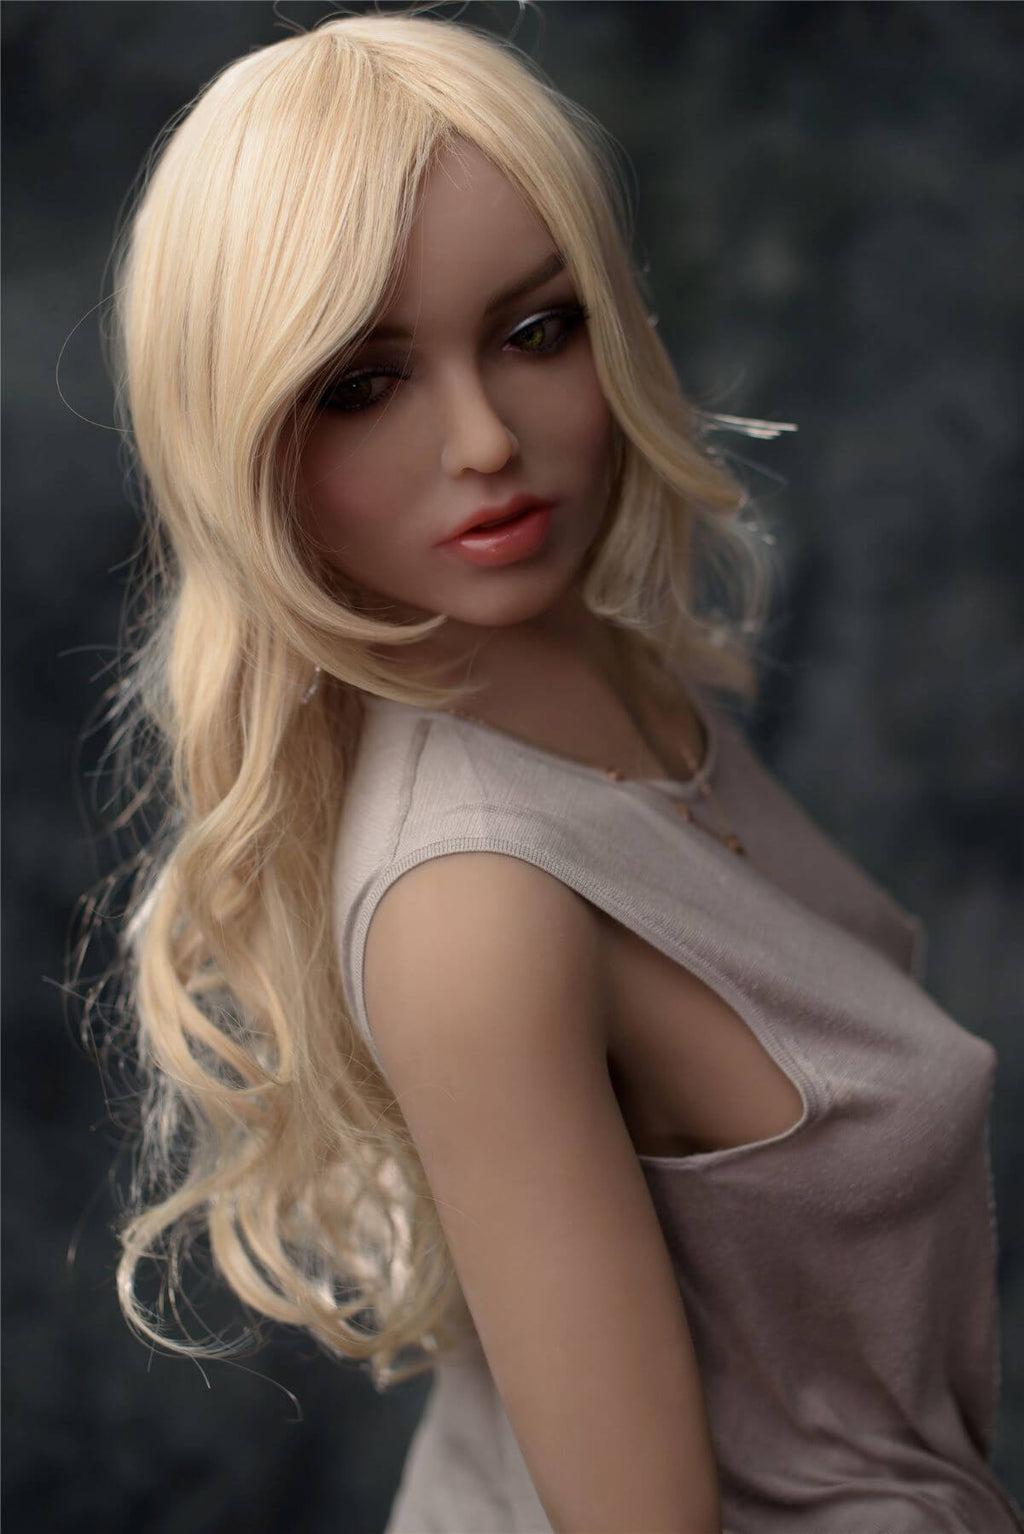 Realistic 148cm Love Doll, Flat Chest Hot Tanned Girl Alexia with Blonde Hair